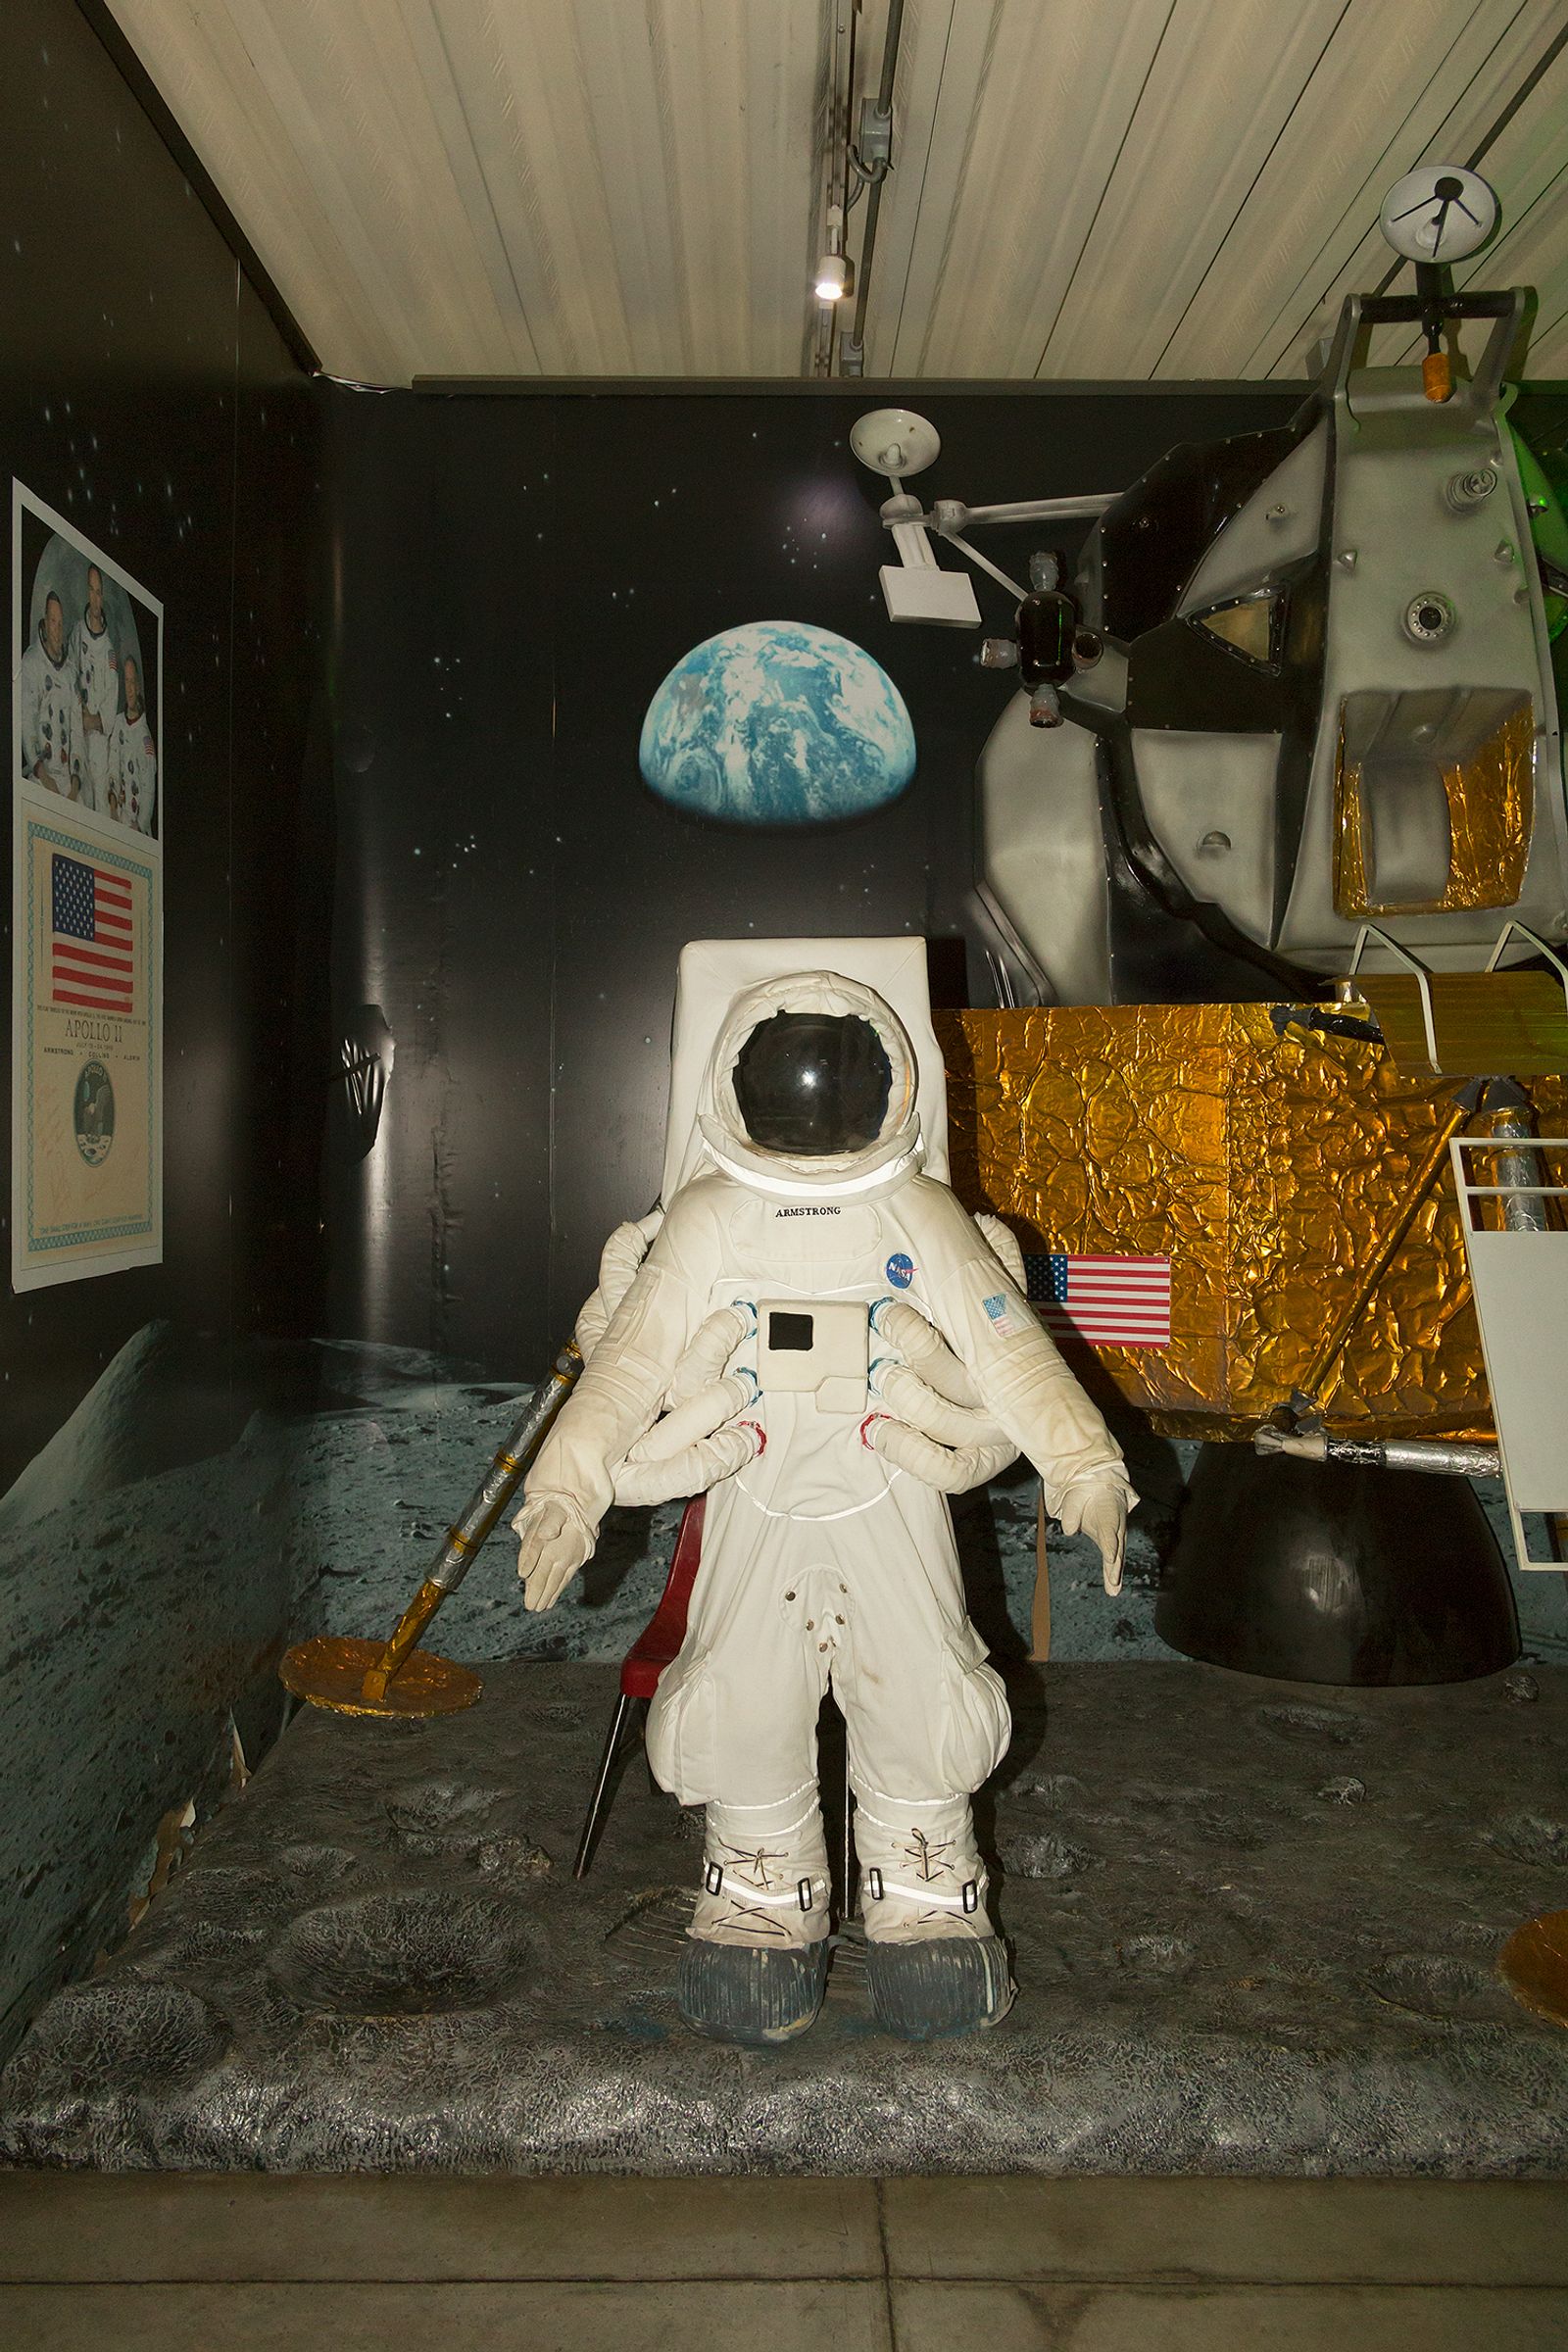 © Melba Arellano - The first space museum opened in the 60's in the north part of the city.